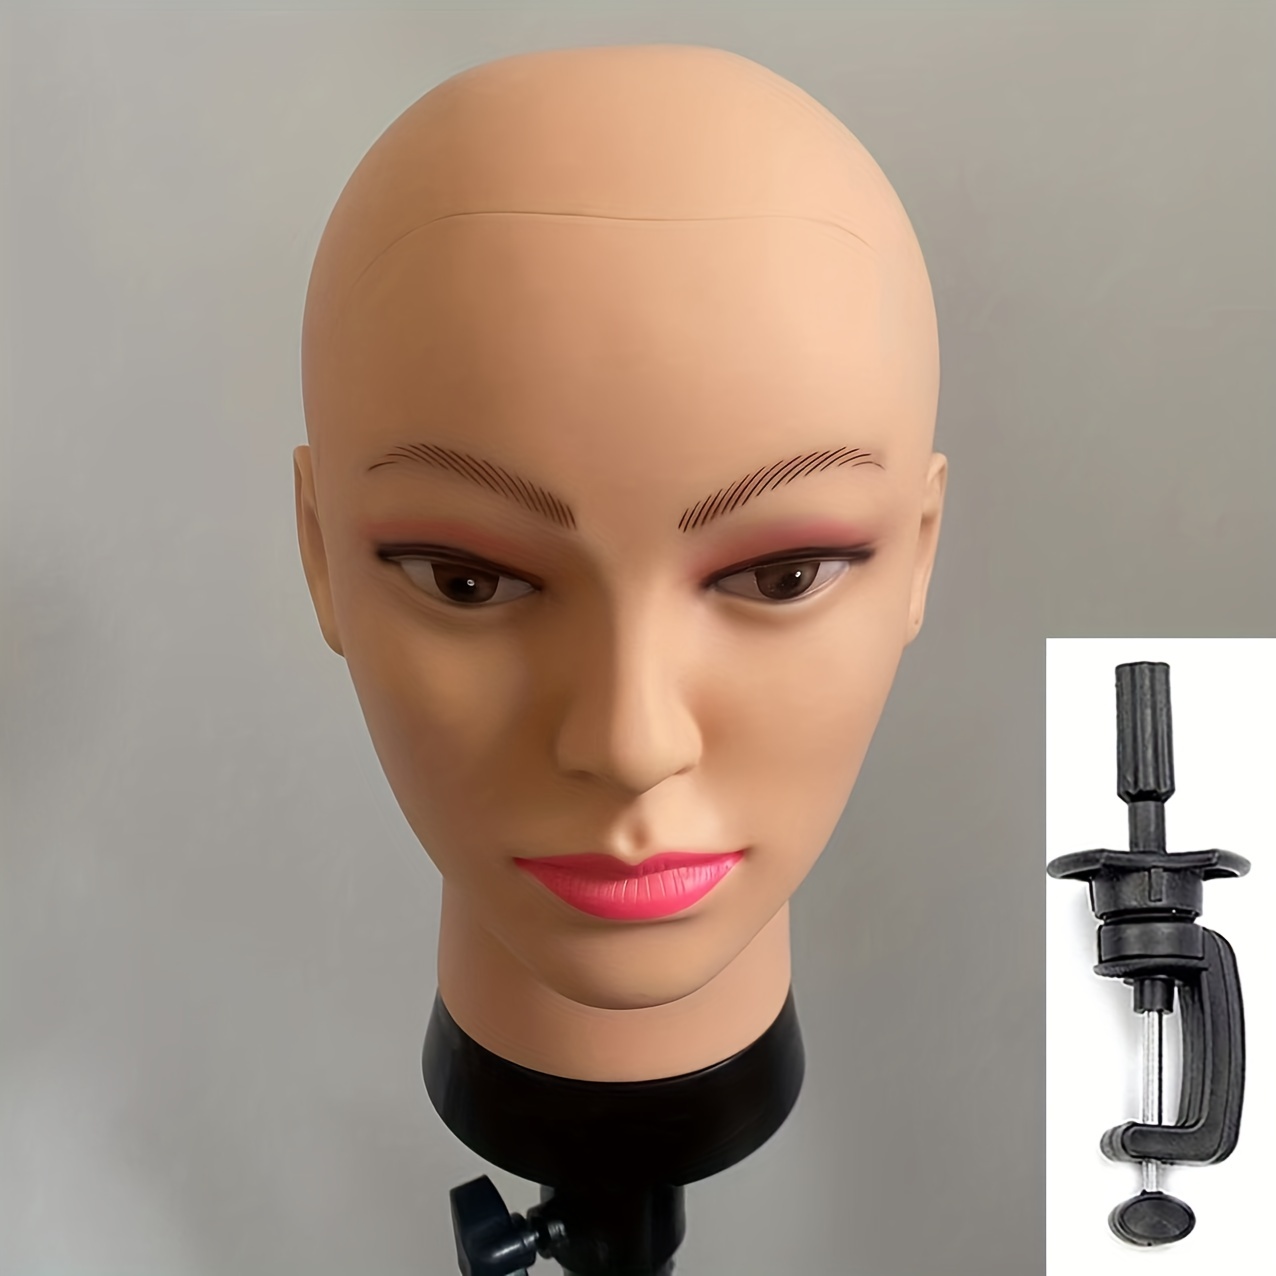 STUDIO LIMITED Canvas Block Head DIY Wig Making Starter Kit 12pcs, Long  Neck (12), Mannequin Head Wig Display and Stand for Wig Styling (23'' Set)